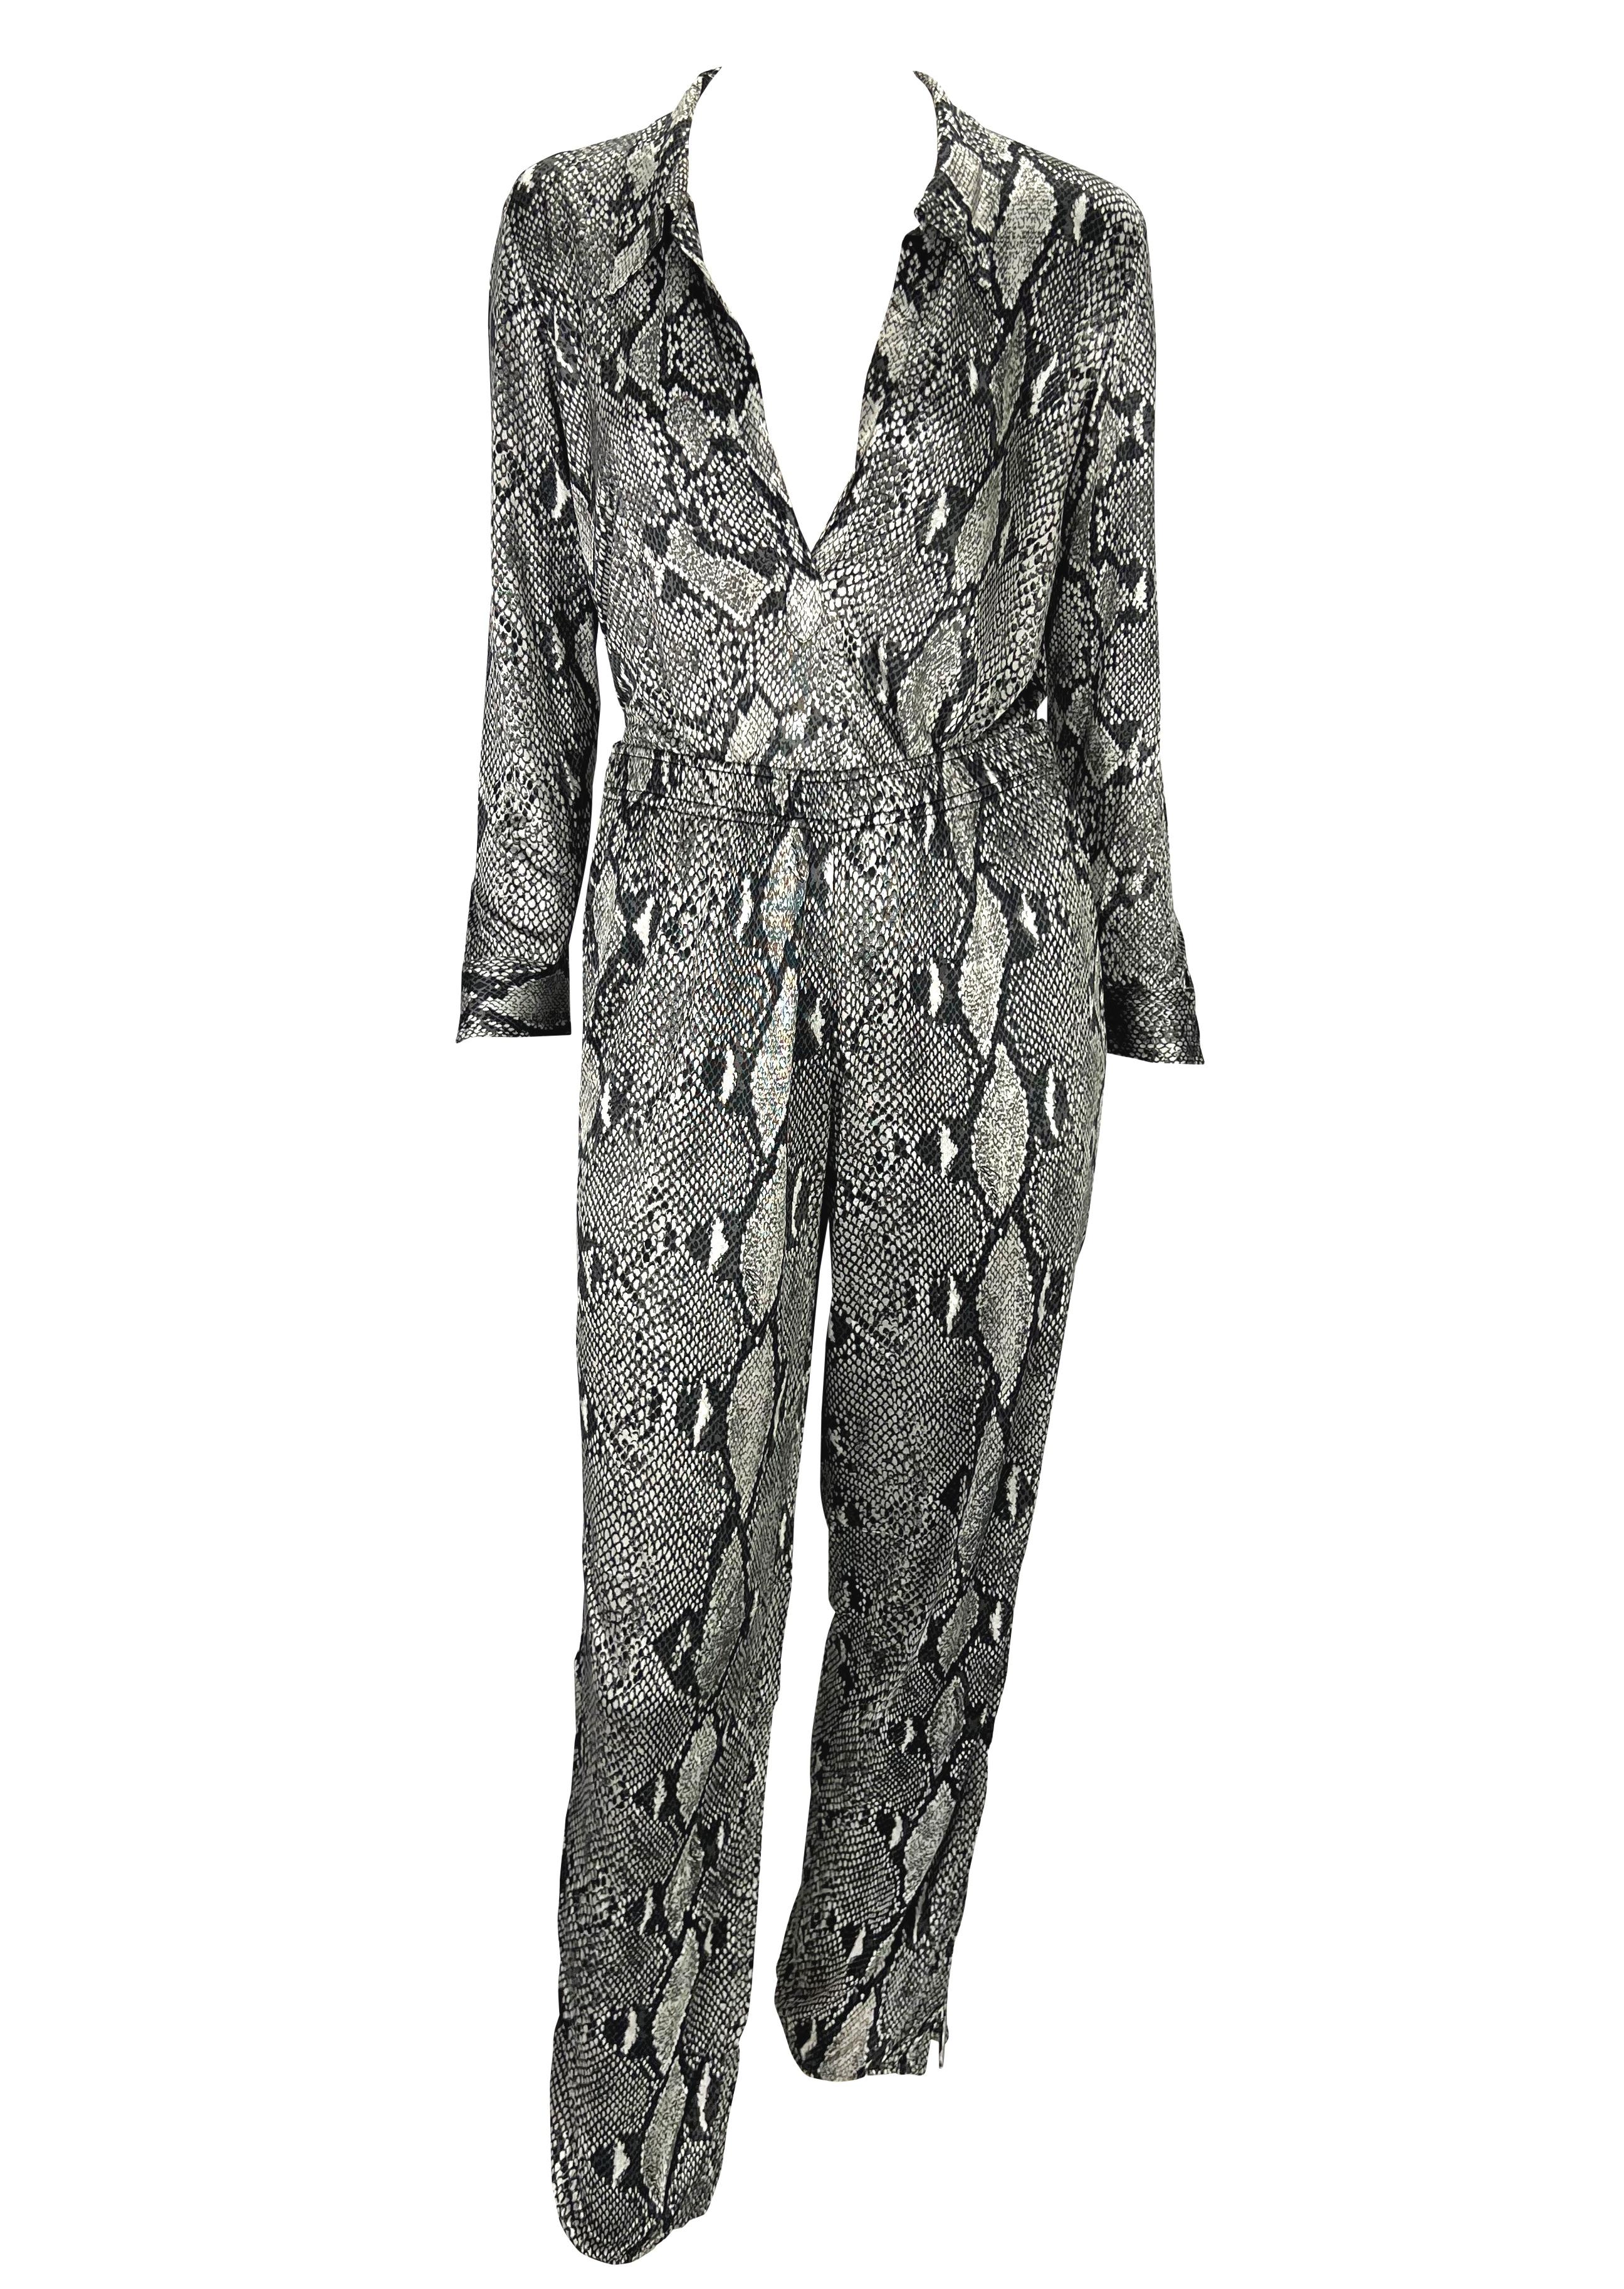 Gray S/S 2000 Gucci by Tom Ford Black White Snakeskin Logo Print Viscose Pant Set For Sale